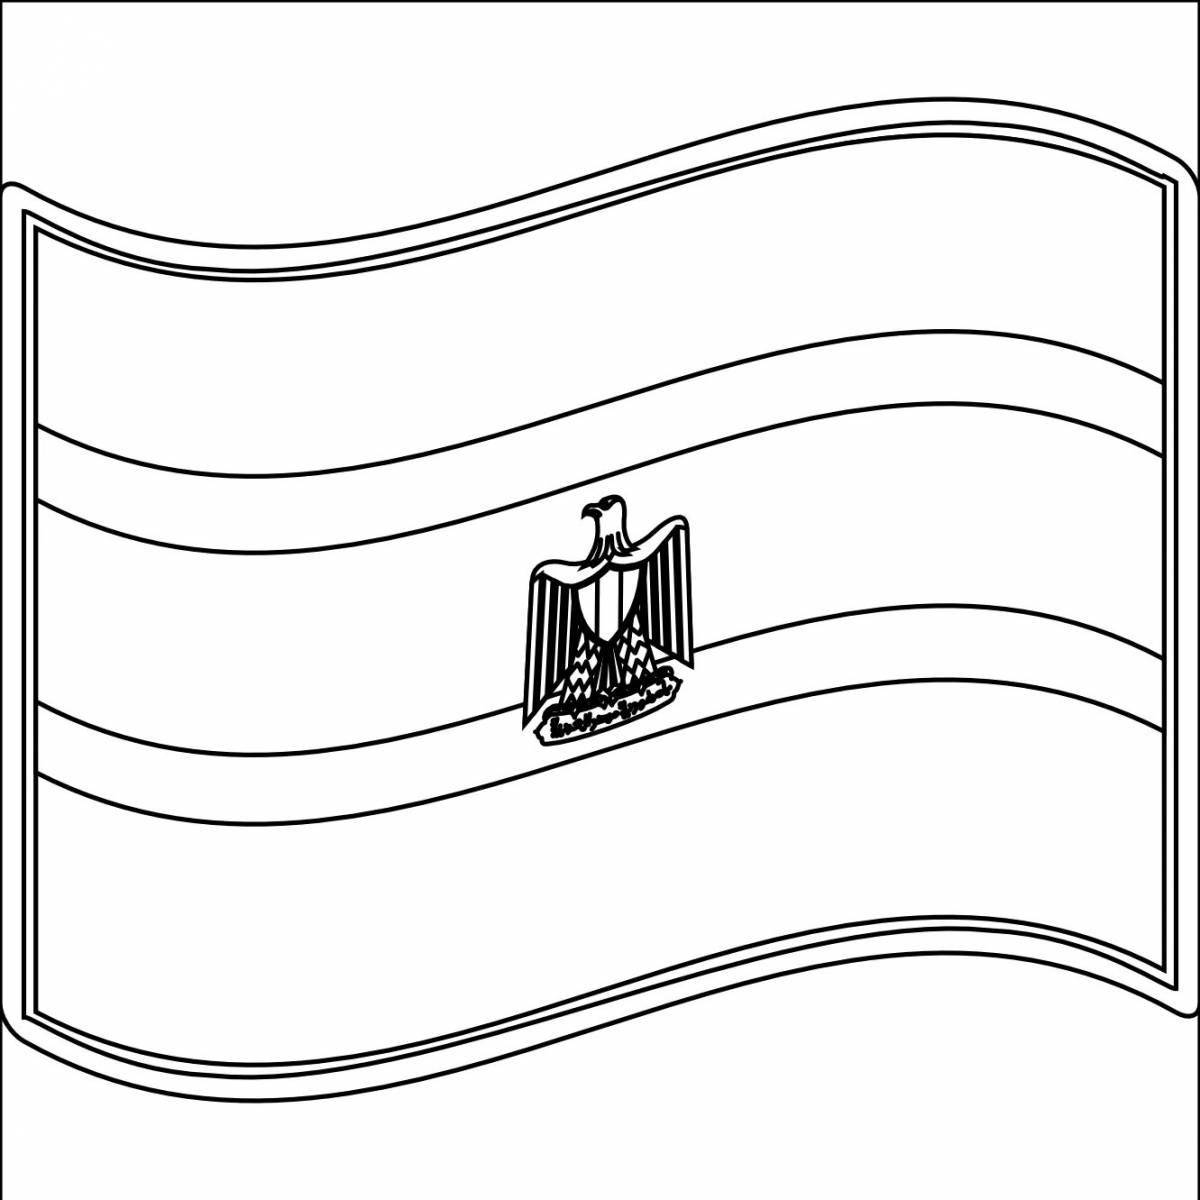 Adorable Egyptian flag coloring page